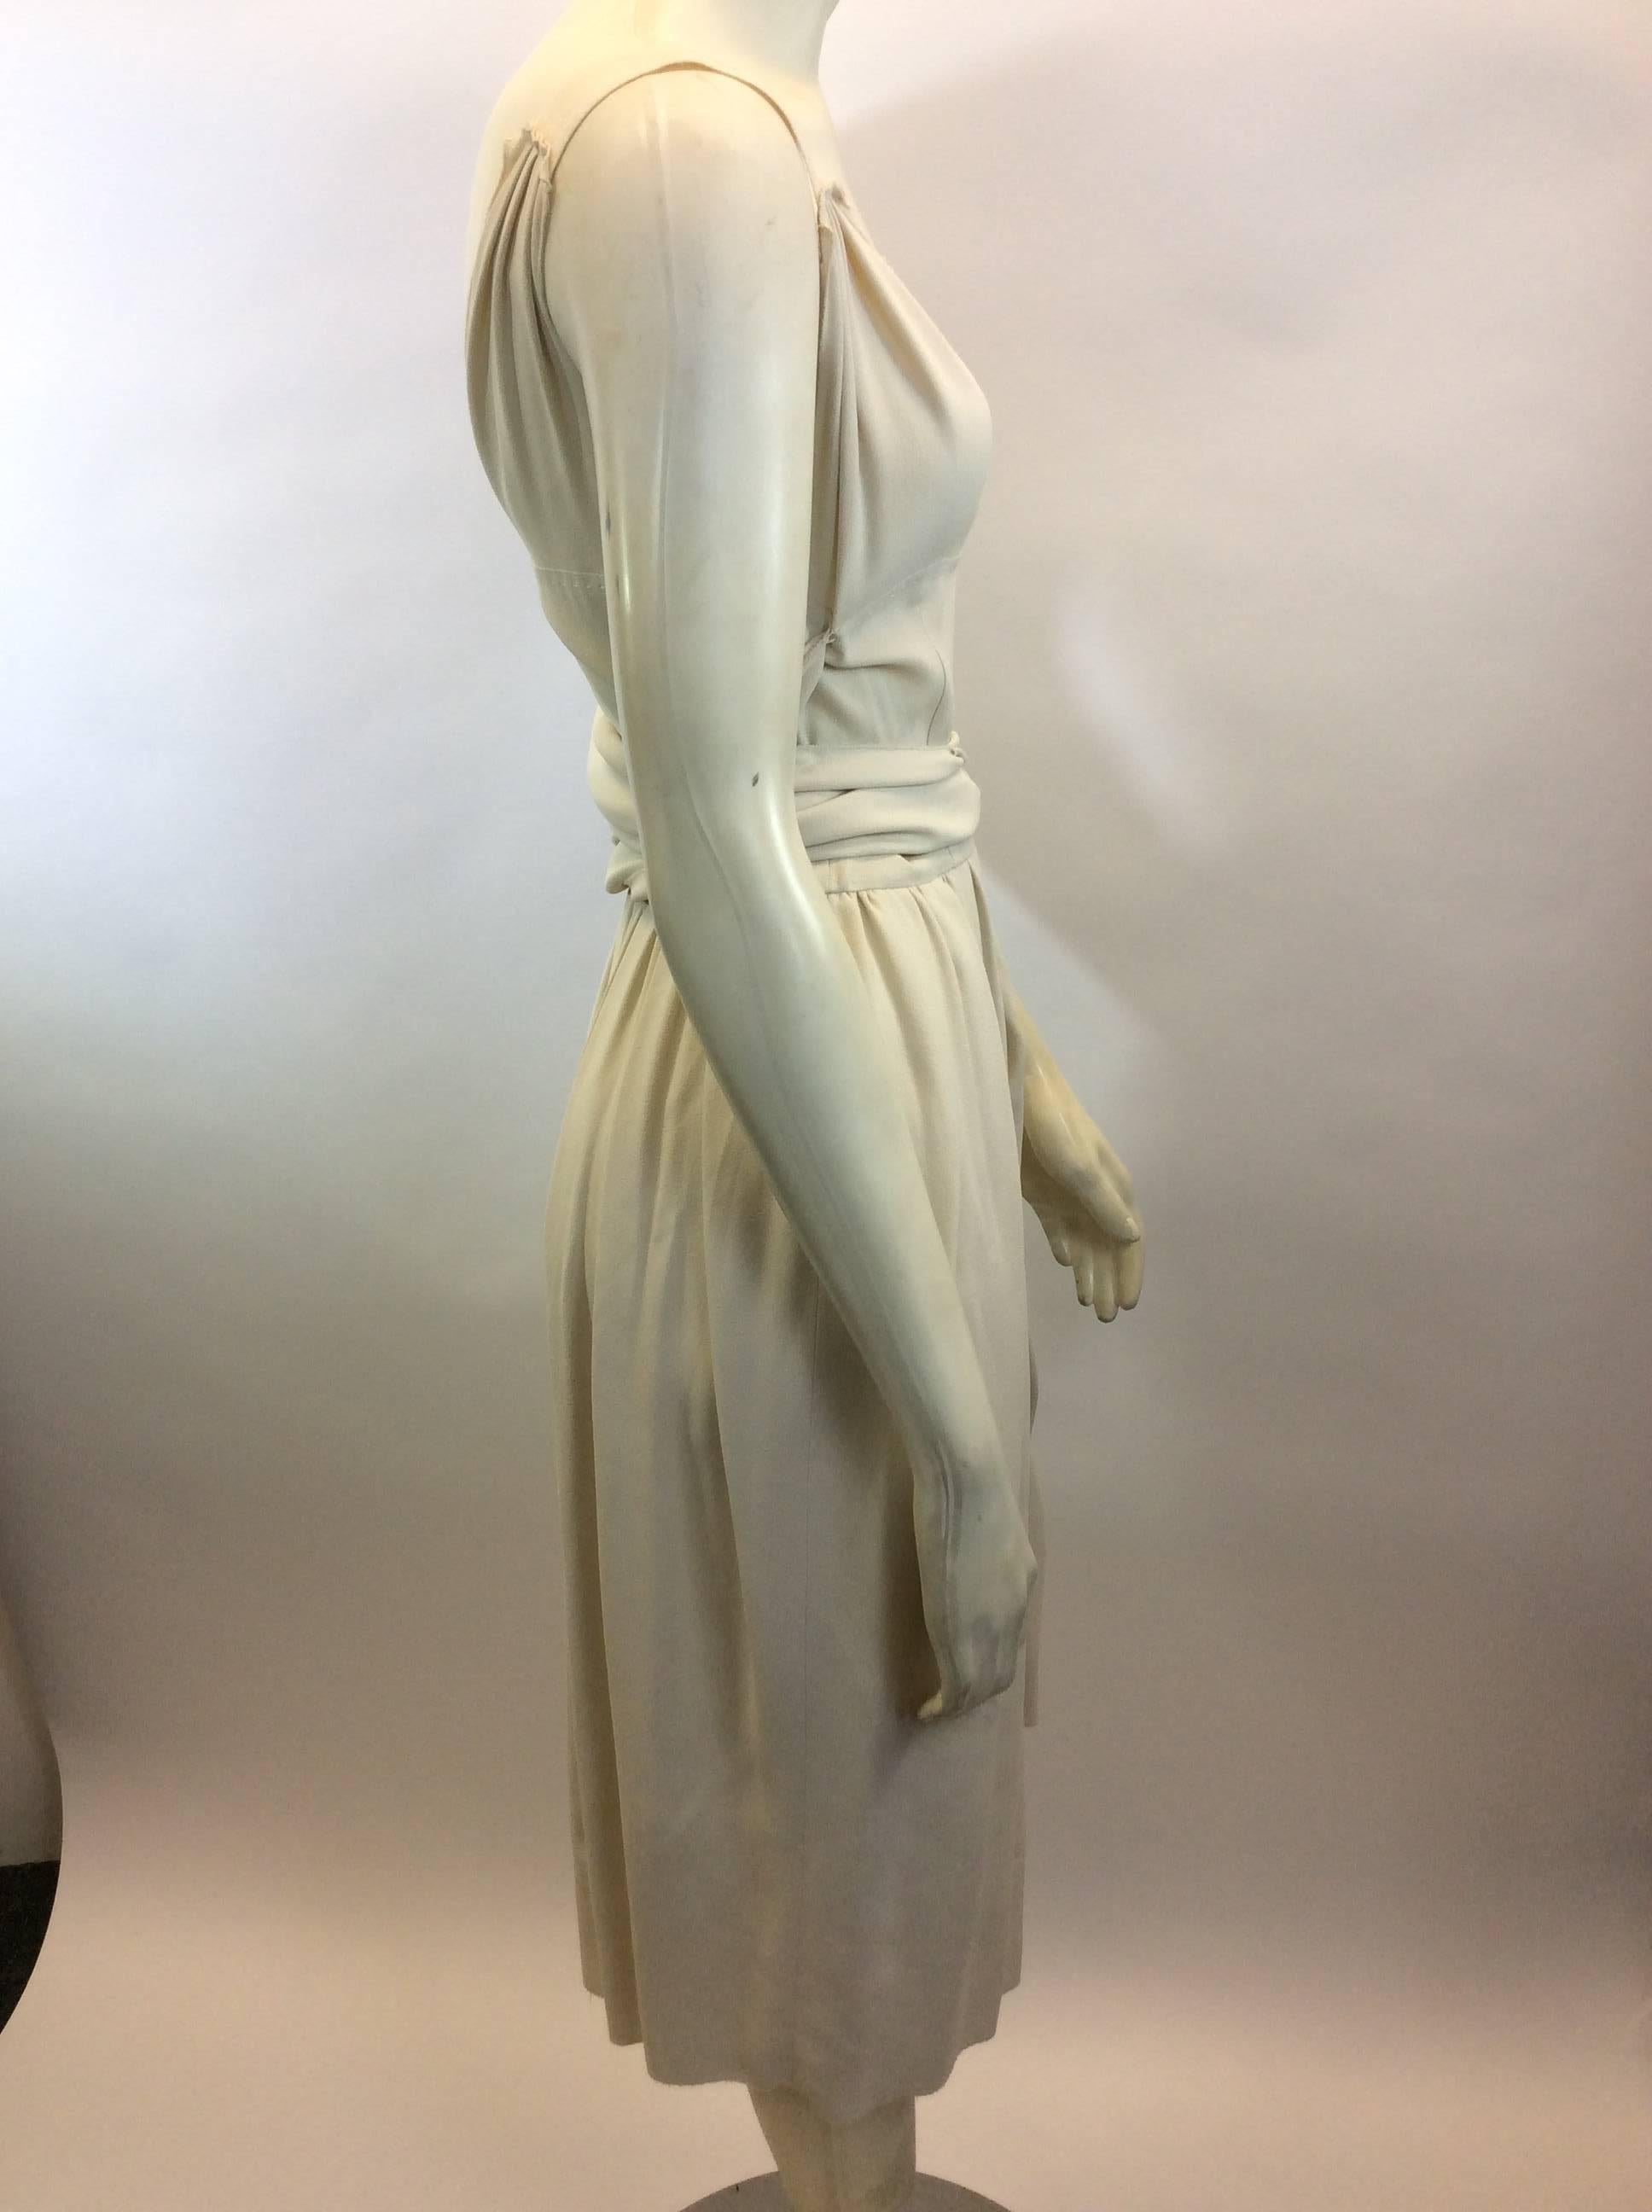 Prada Tan Dress In Excellent Condition For Sale In Narberth, PA